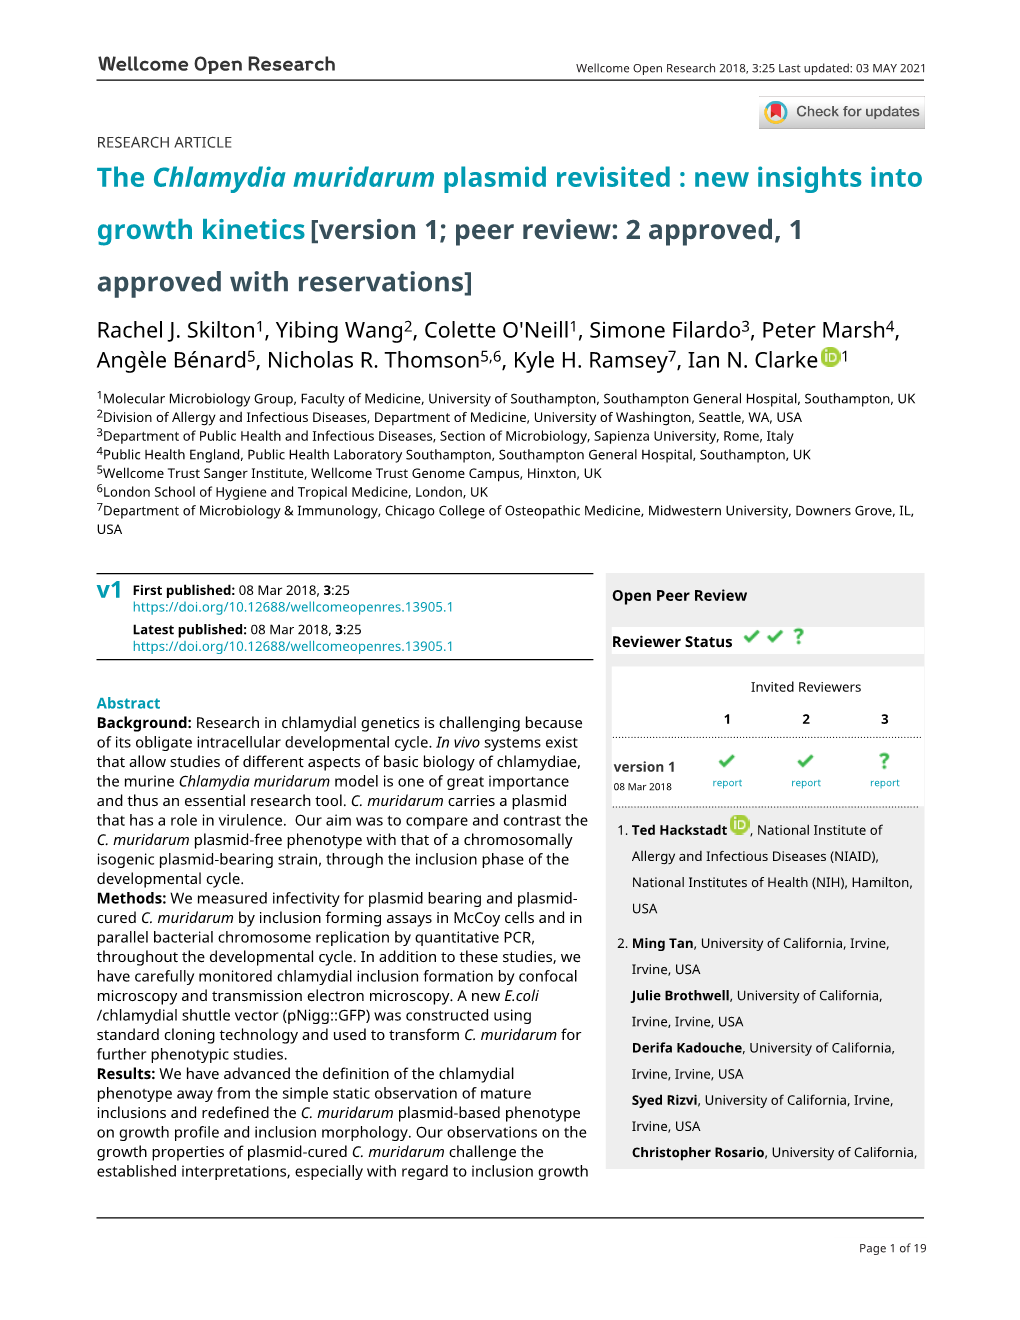 The Chlamydia Muridarum Plasmid Revisited : New Insights Into Growth Kinetics [Version 1; Peer Review: 2 Approved, 1 Approved with Reservations]